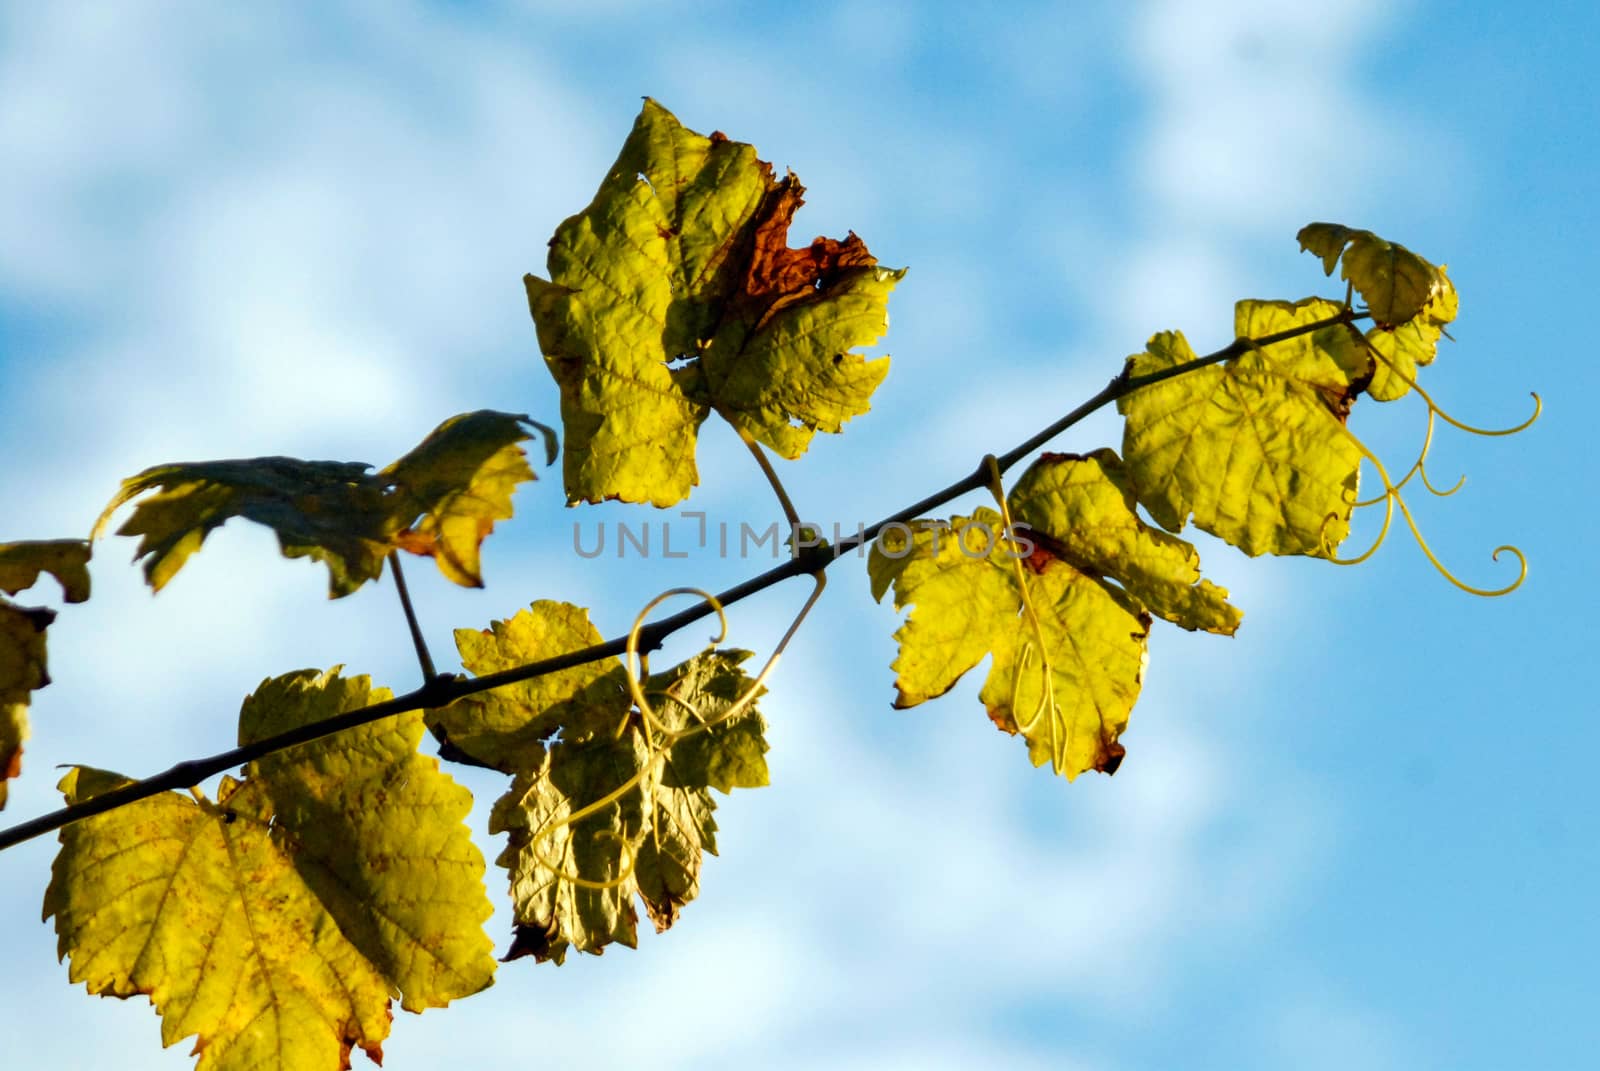 Vine tendril in sun bright blue sky green leafs by MXW_Stock